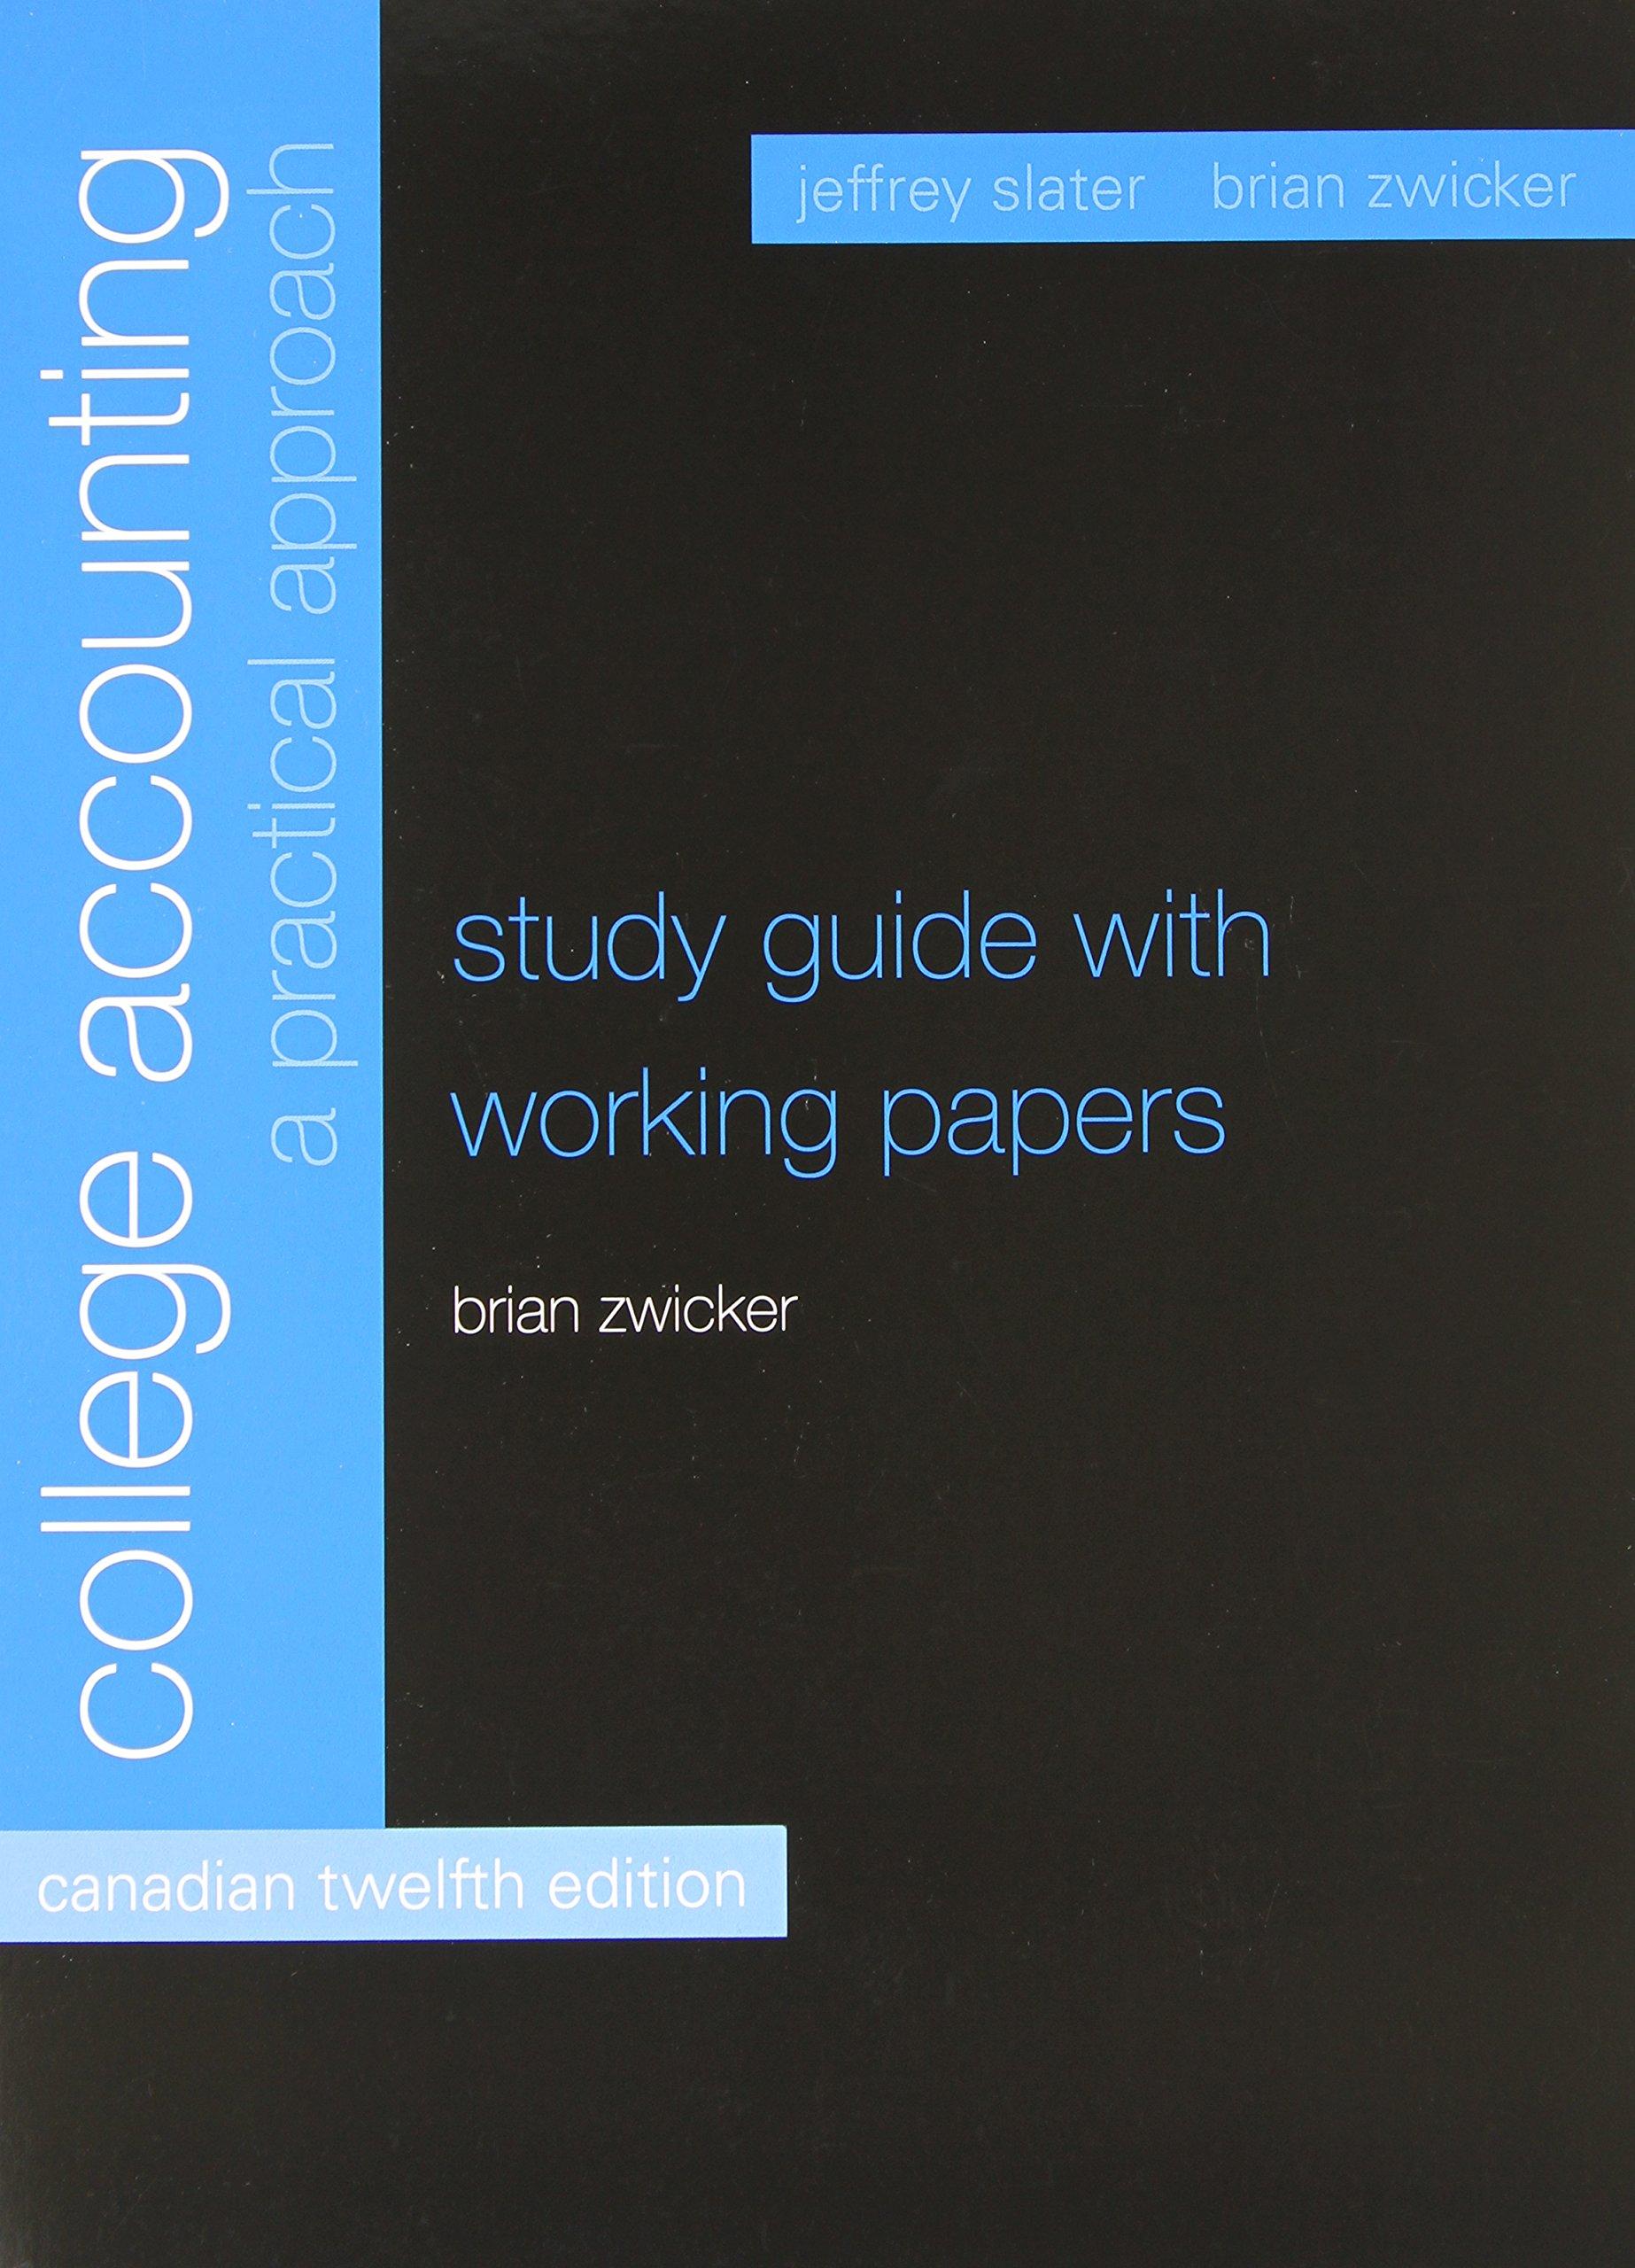 study guide and working papers for college accounting 12th canadian edition jeffrey slater, brian zwicker